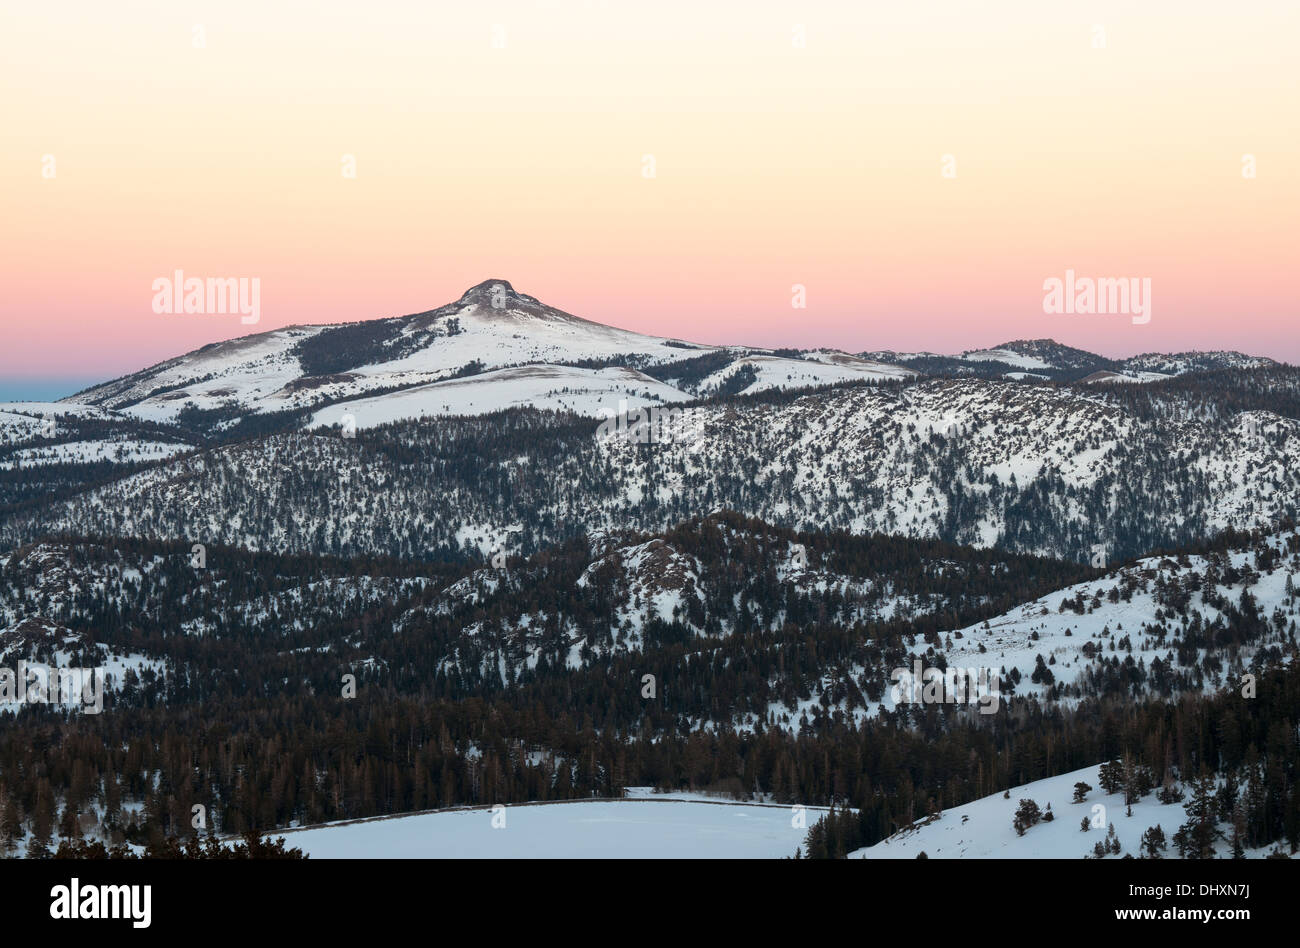 A view of the Stevens Peak against the background of golden sunset shot from highway 88, Lake Tahoe region, California, USA. Stock Photo